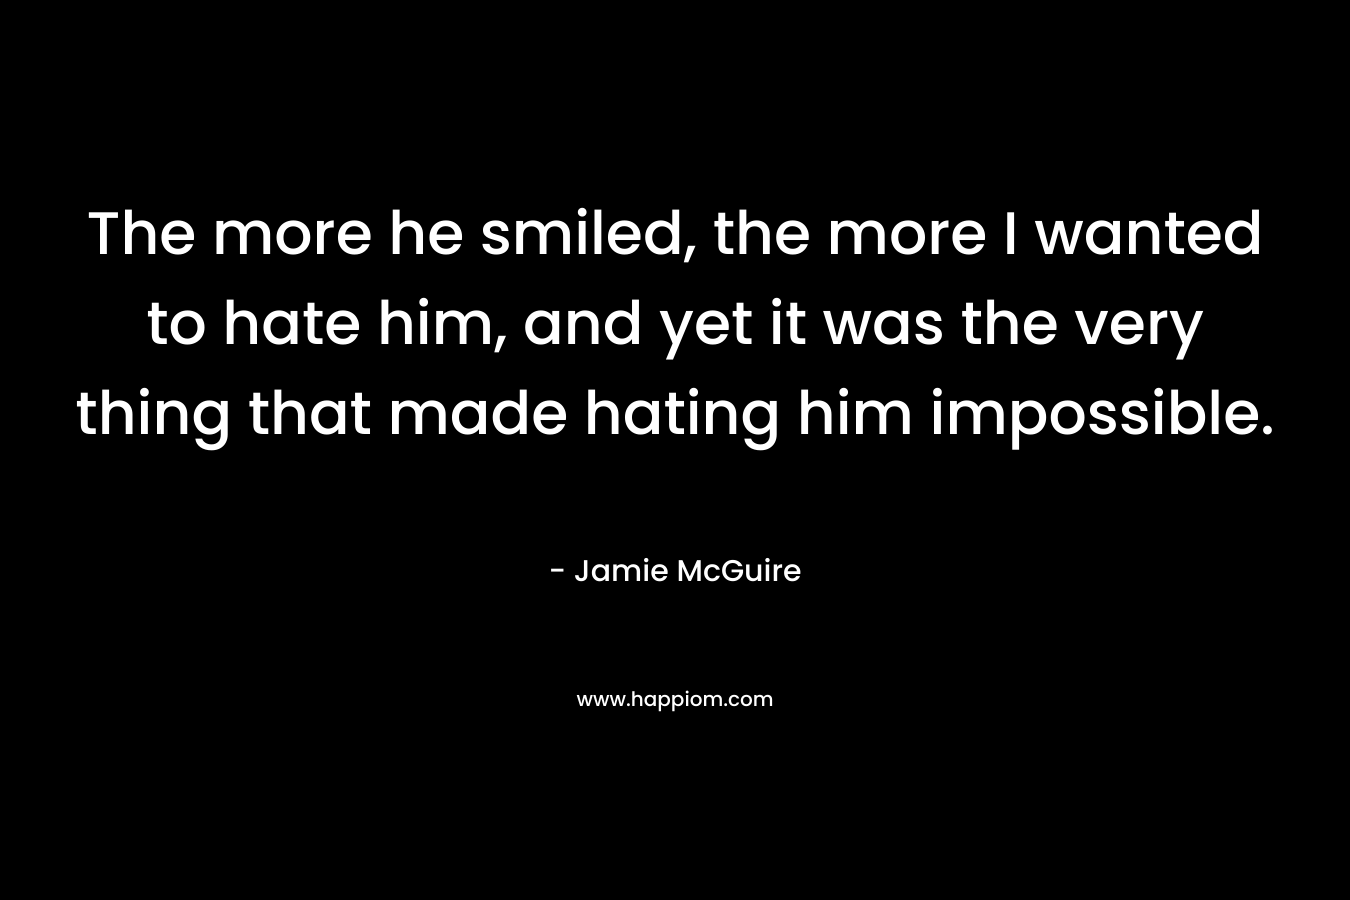 The more he smiled, the more I wanted to hate him, and yet it was the very thing that made hating him impossible. – Jamie McGuire